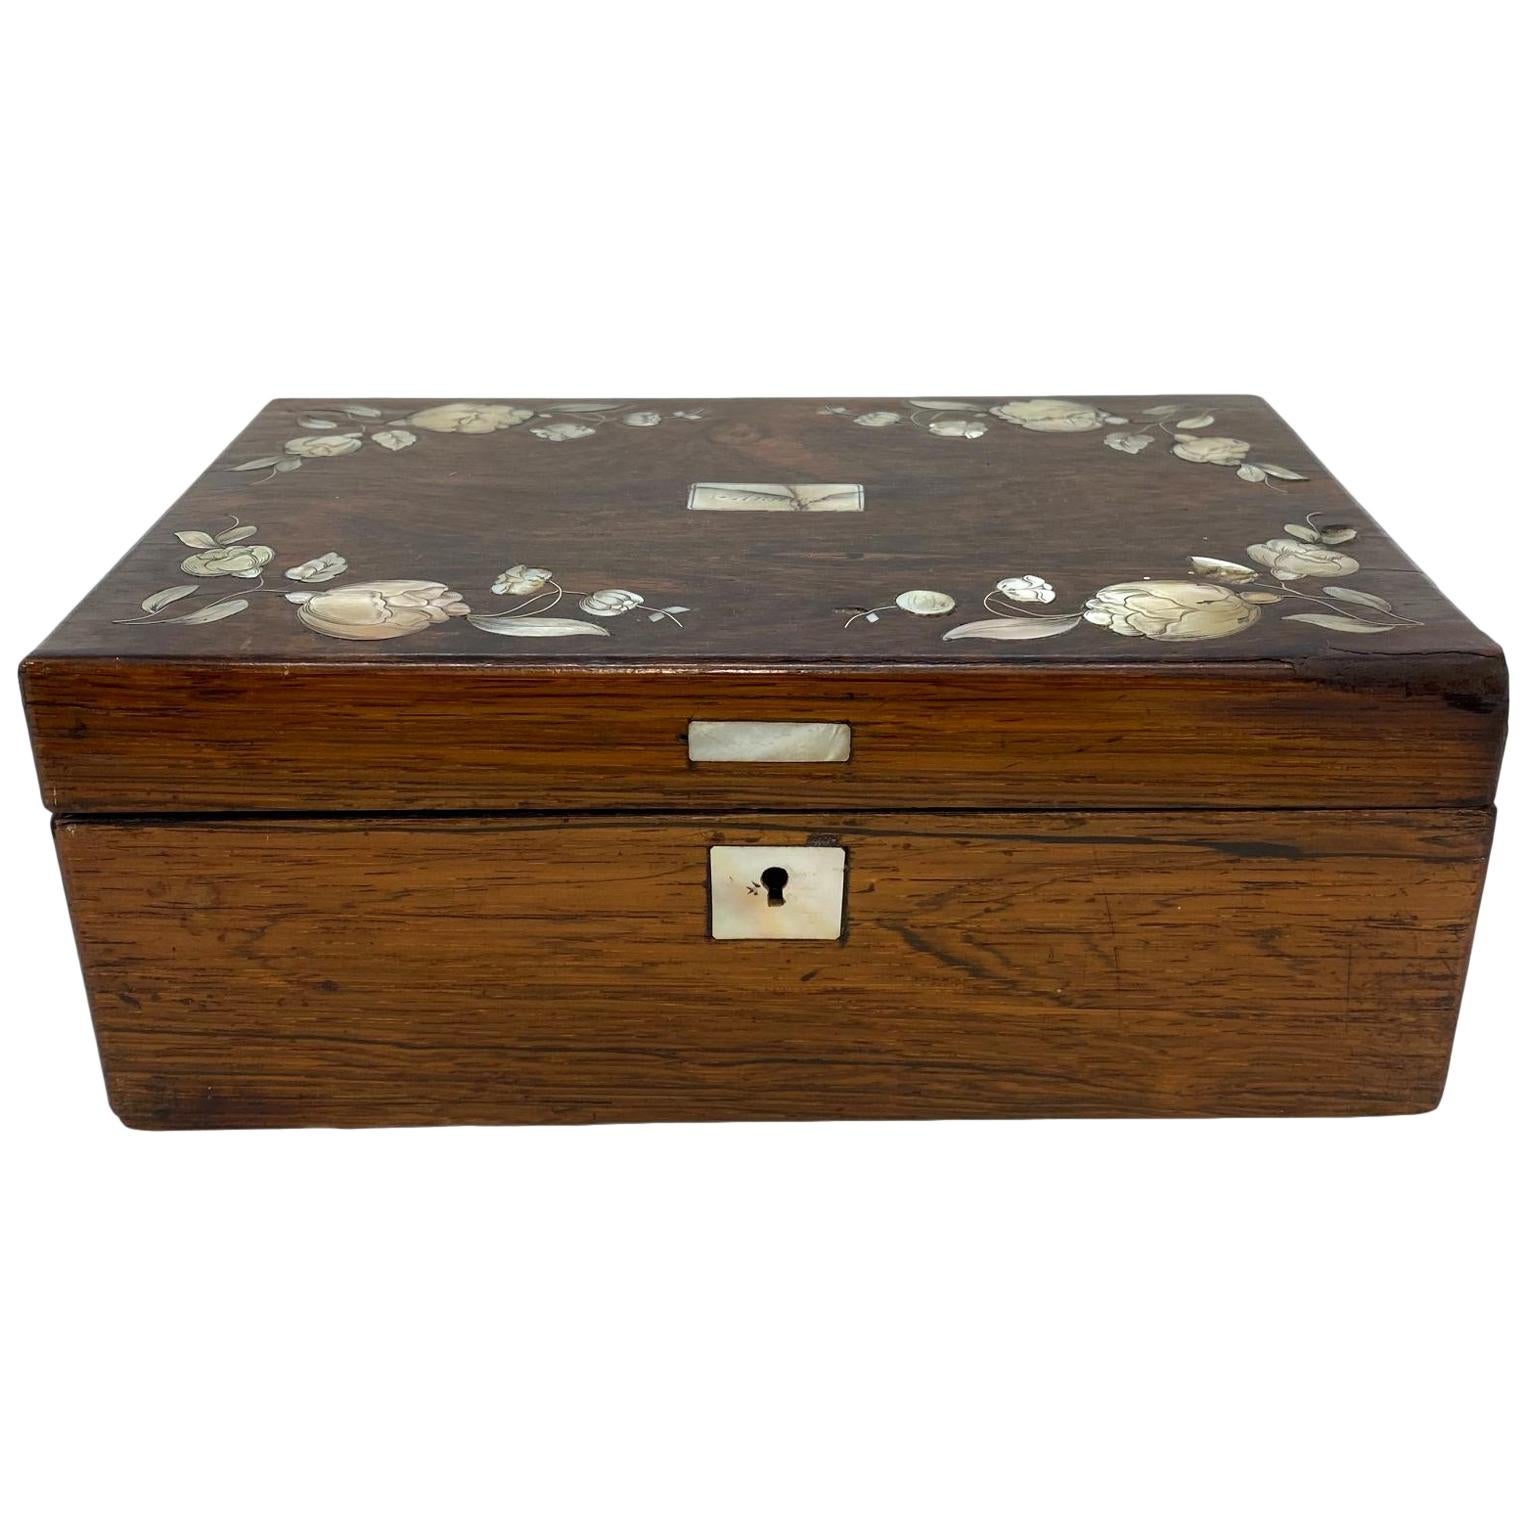 Rosewood Stationery Box with Fine Inlaid Mother of Pearl Flowers, circa 1840